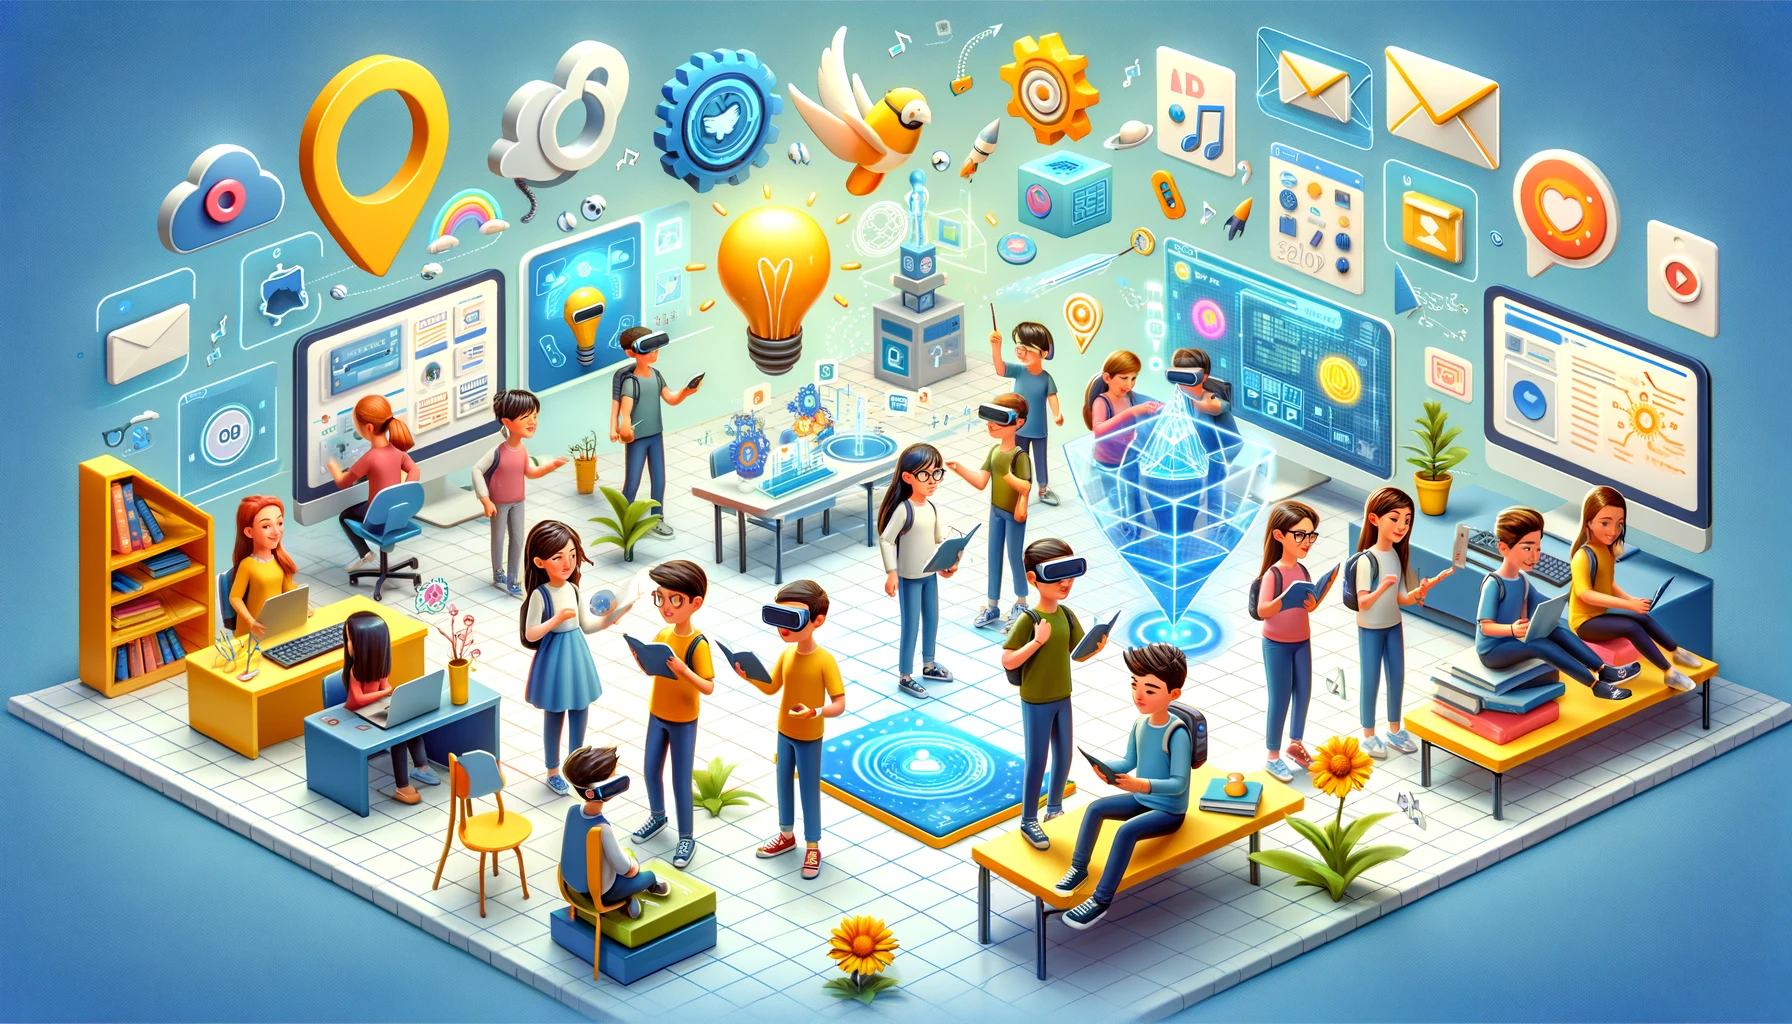 A lively scene depicting immersive learning in an educational context, featuring 3D avatars in a cartoony style. These avatars are engaged in learning